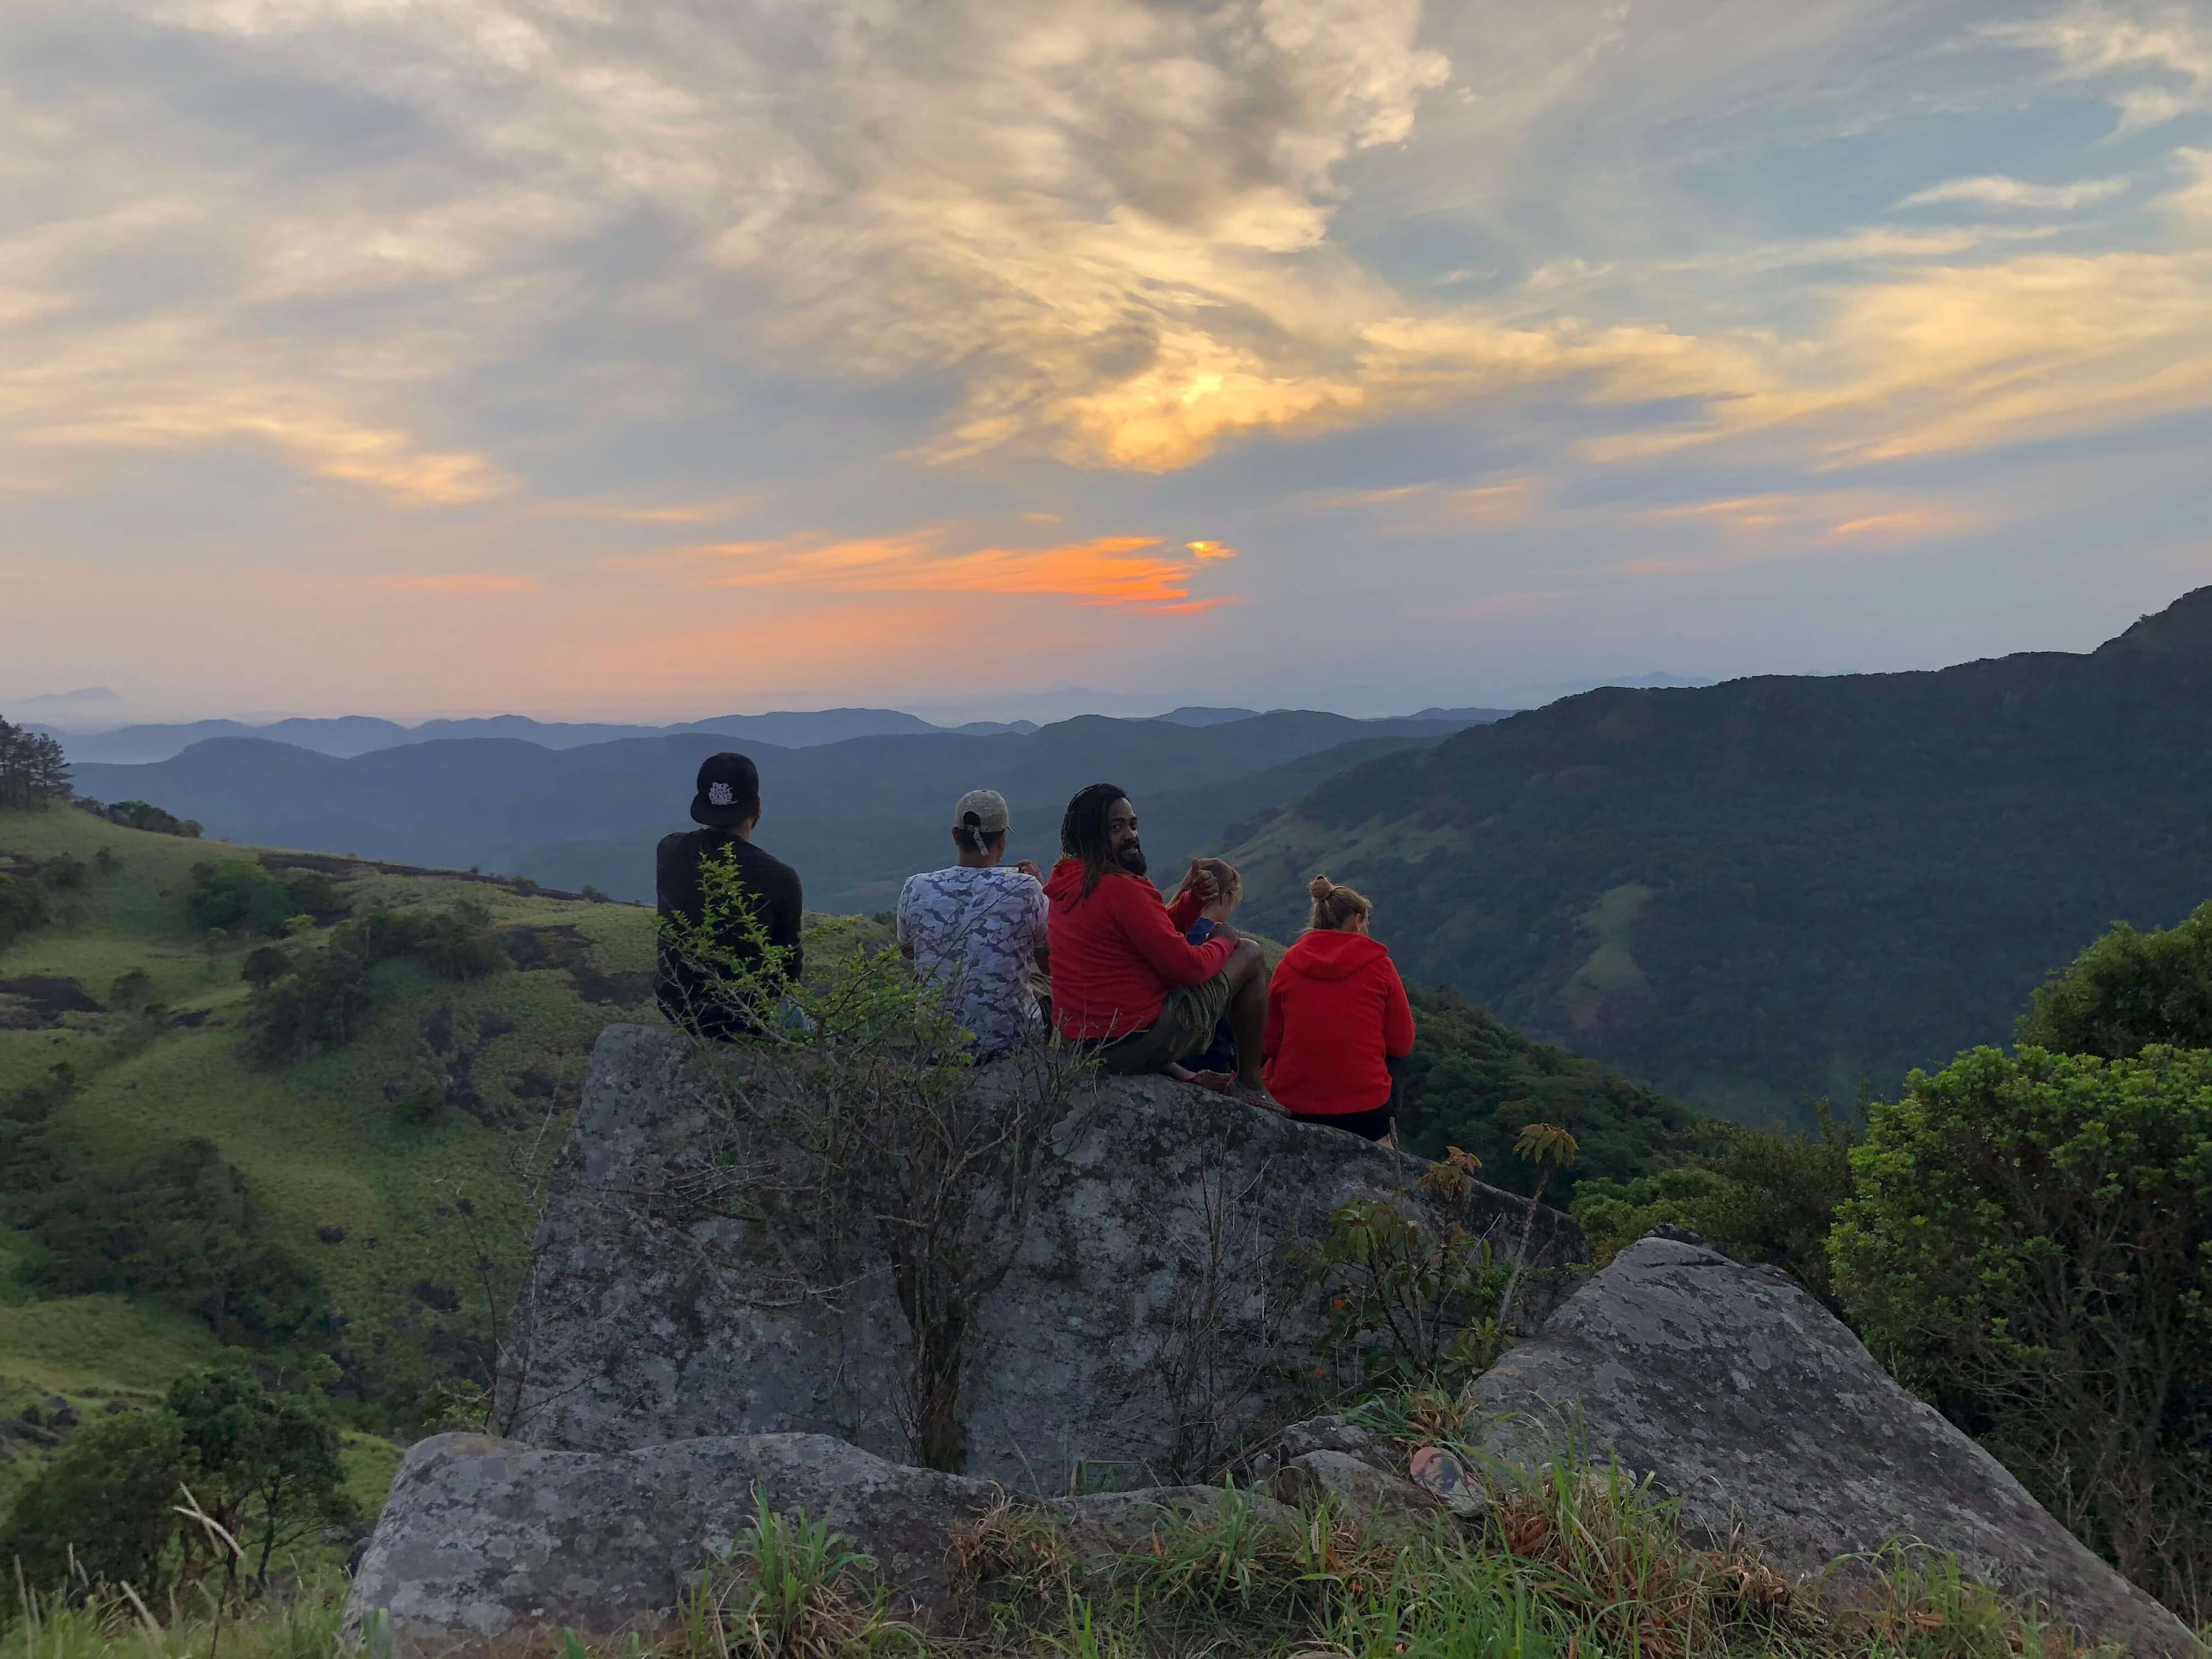 The family watching beauty of nature in Knuckles area Kandy Sri Lanka